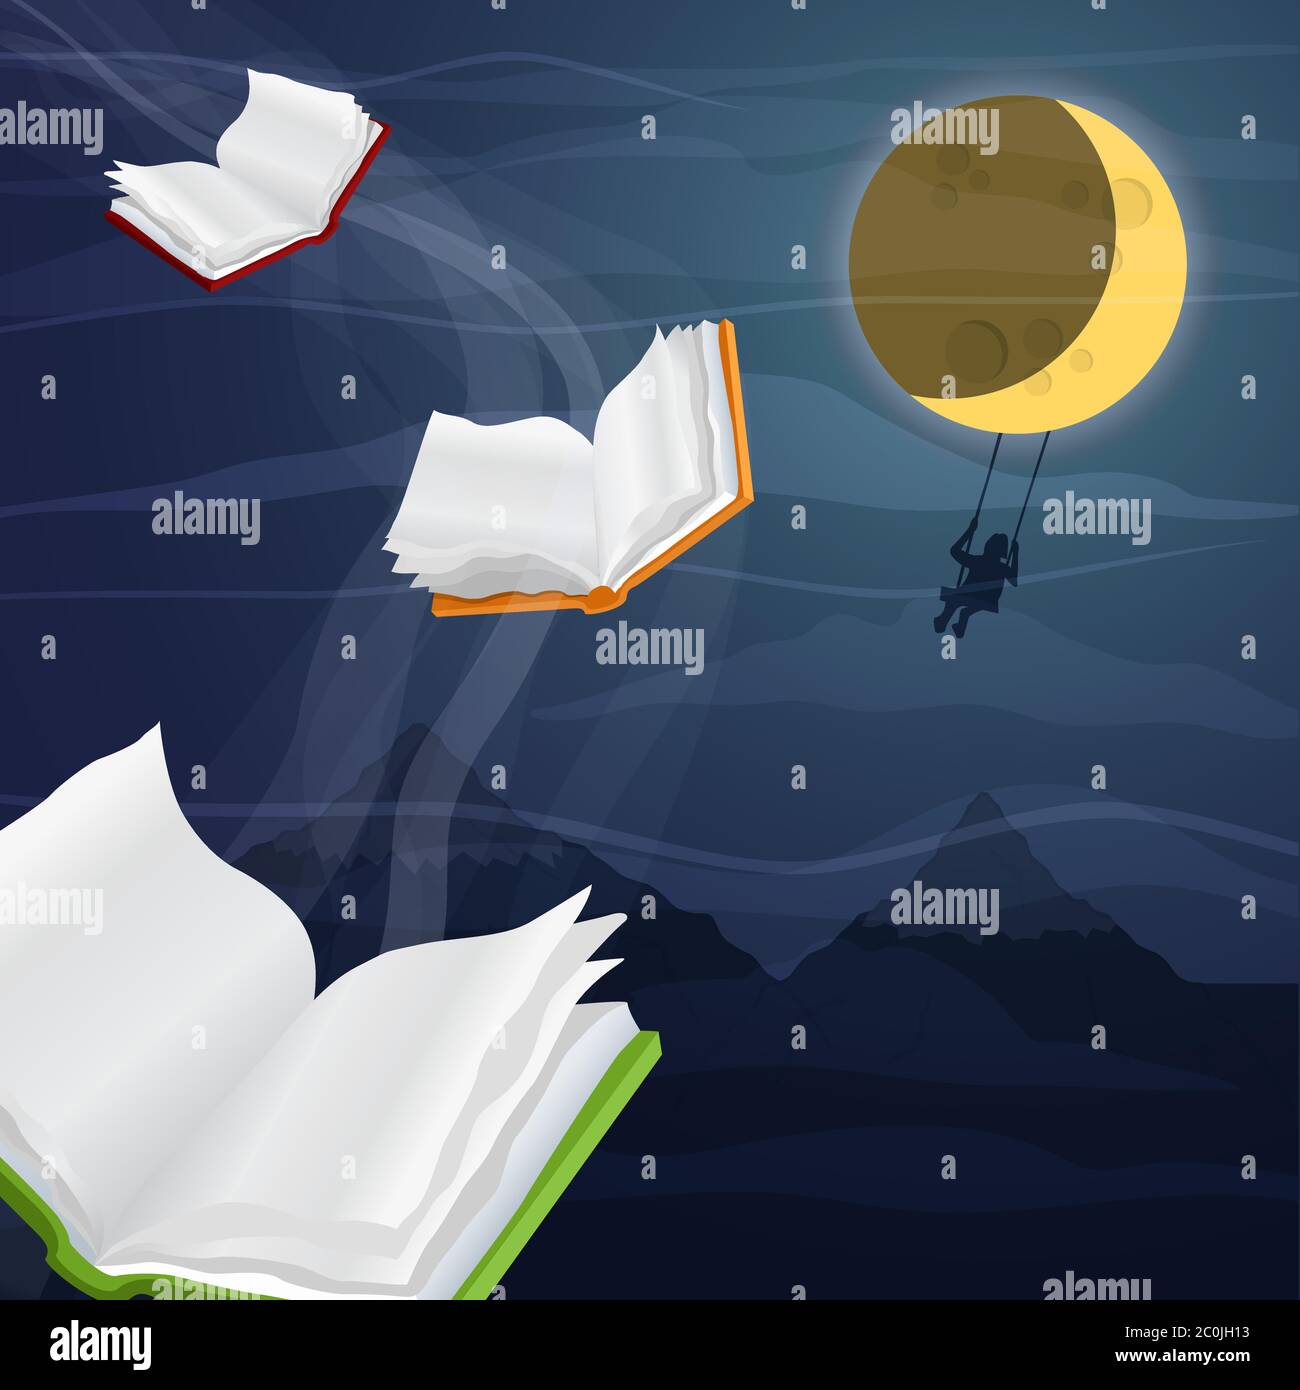 Open books flying in night sky with woman swinging under moon. Reading imagination or education knowledge concept. Stock Vector